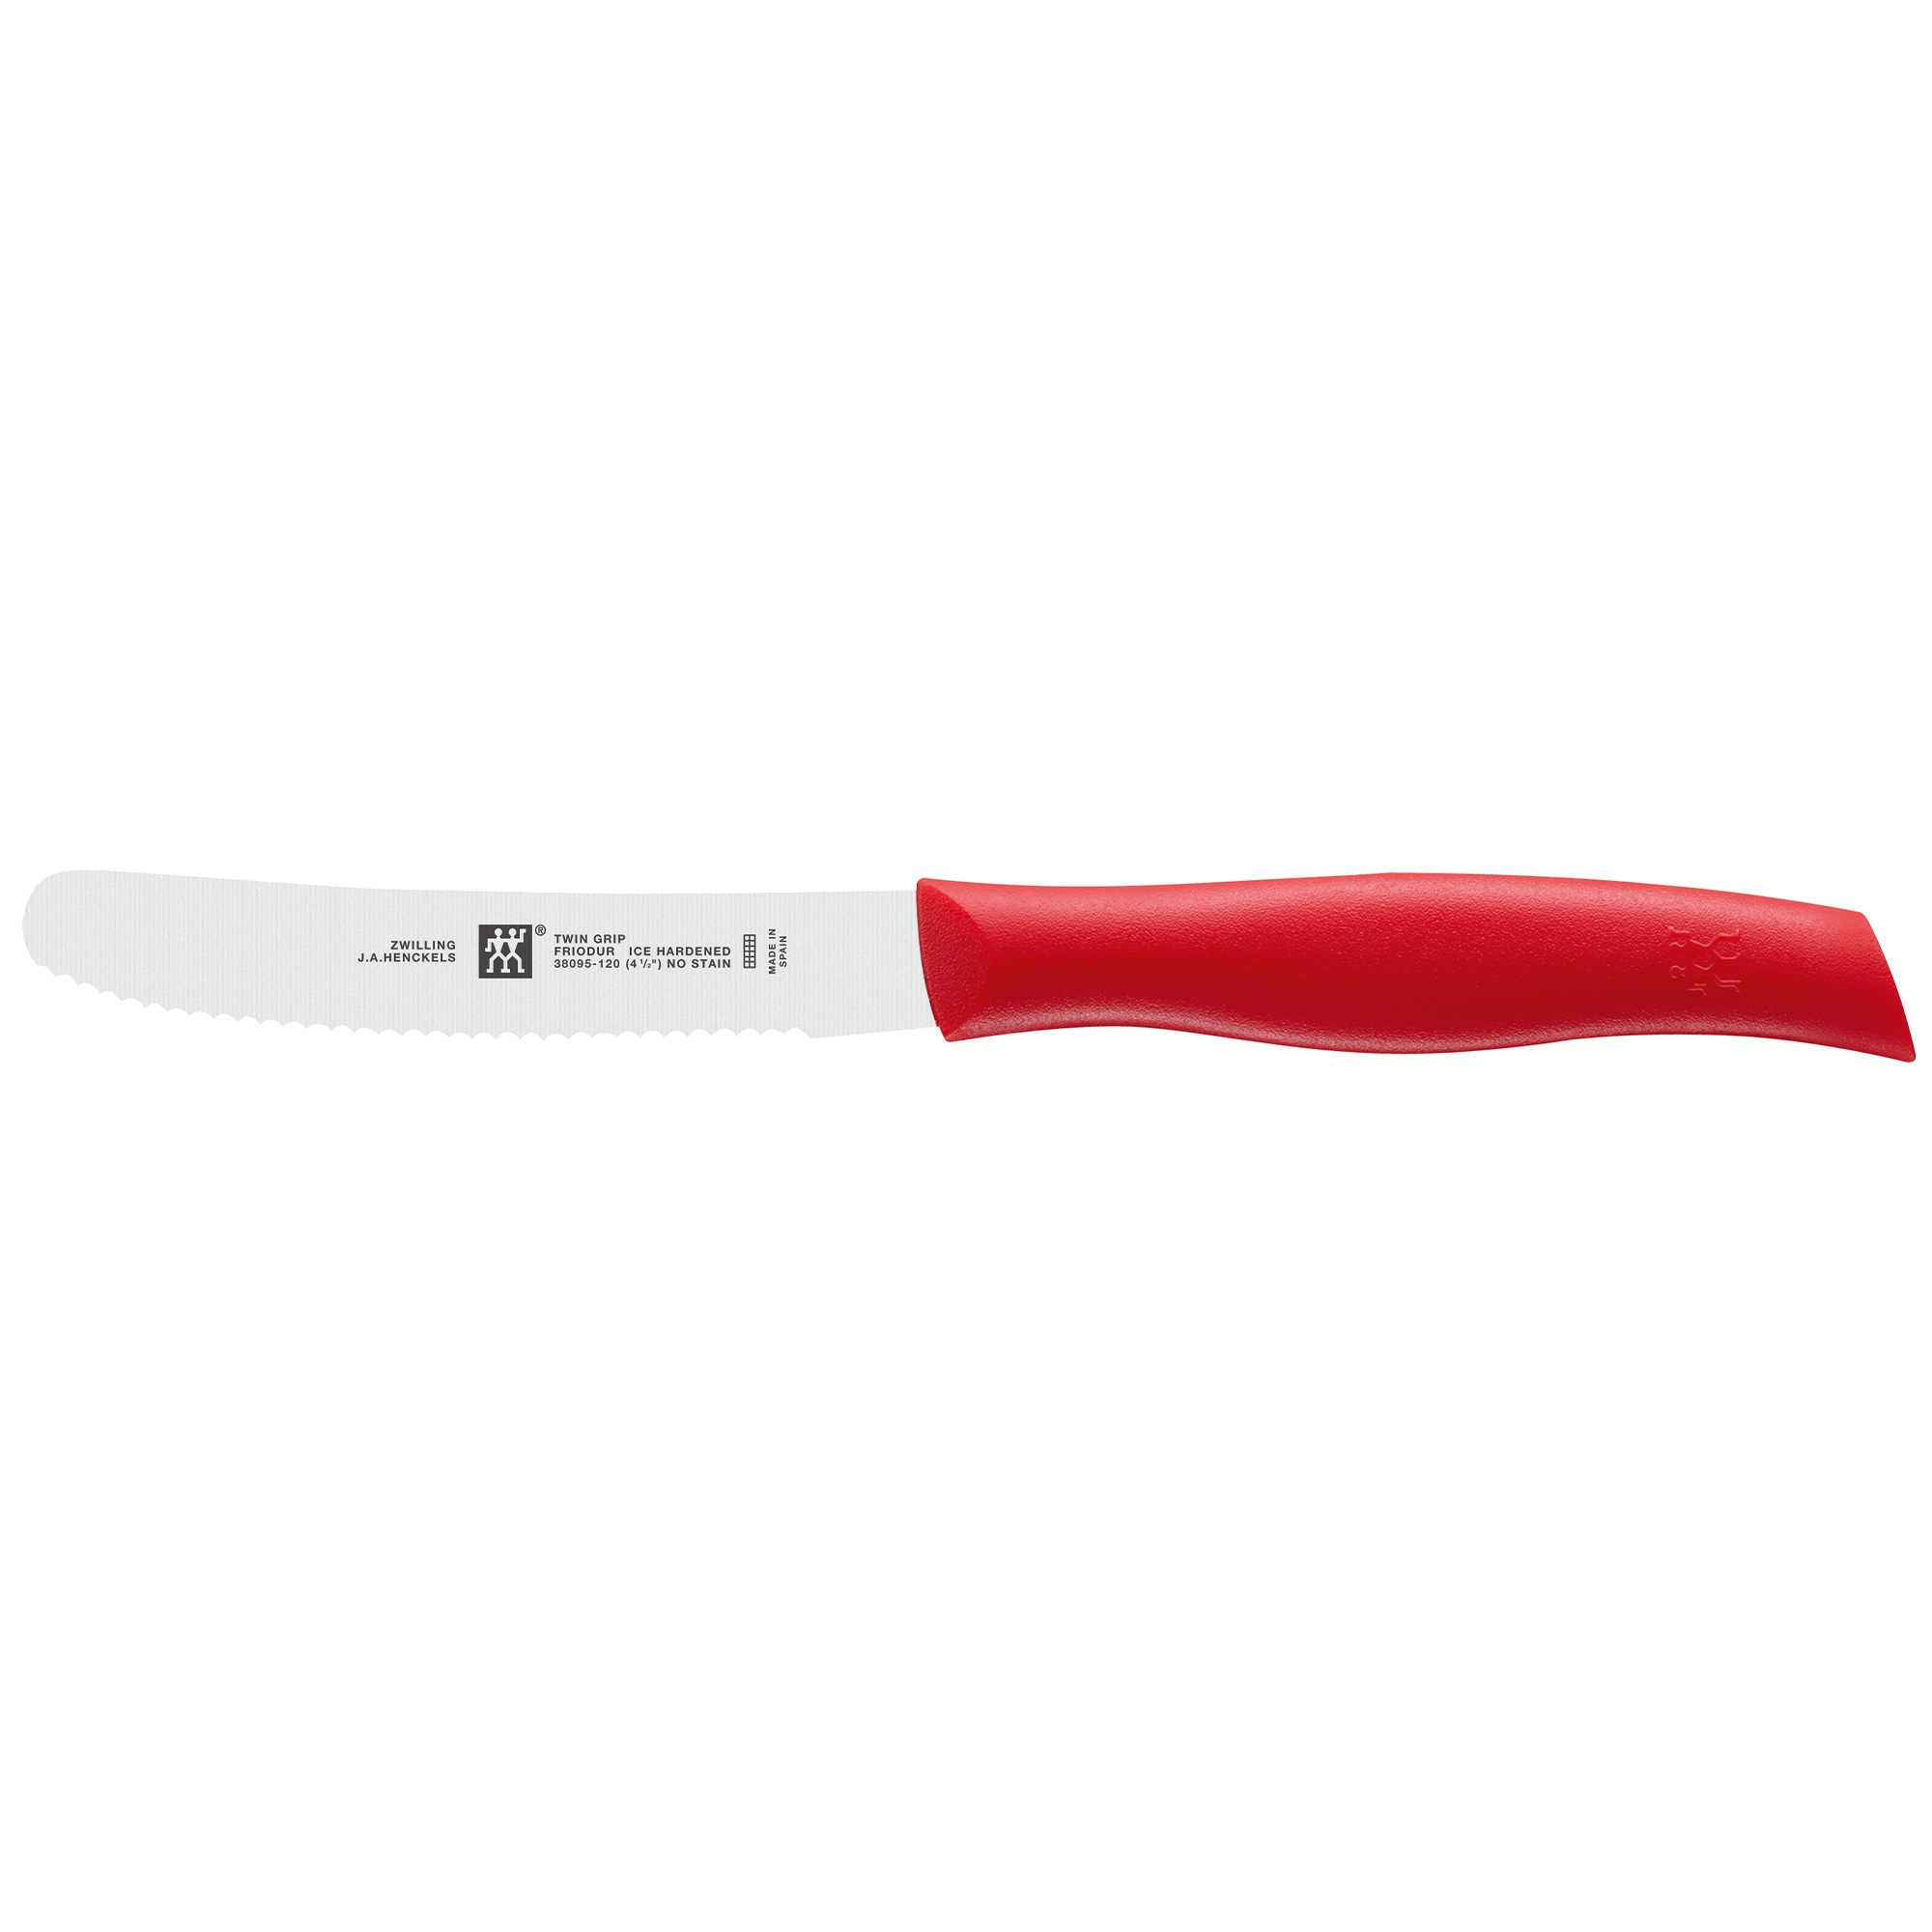 Zwilling -TWIN Grip - knife set of 2, red/green